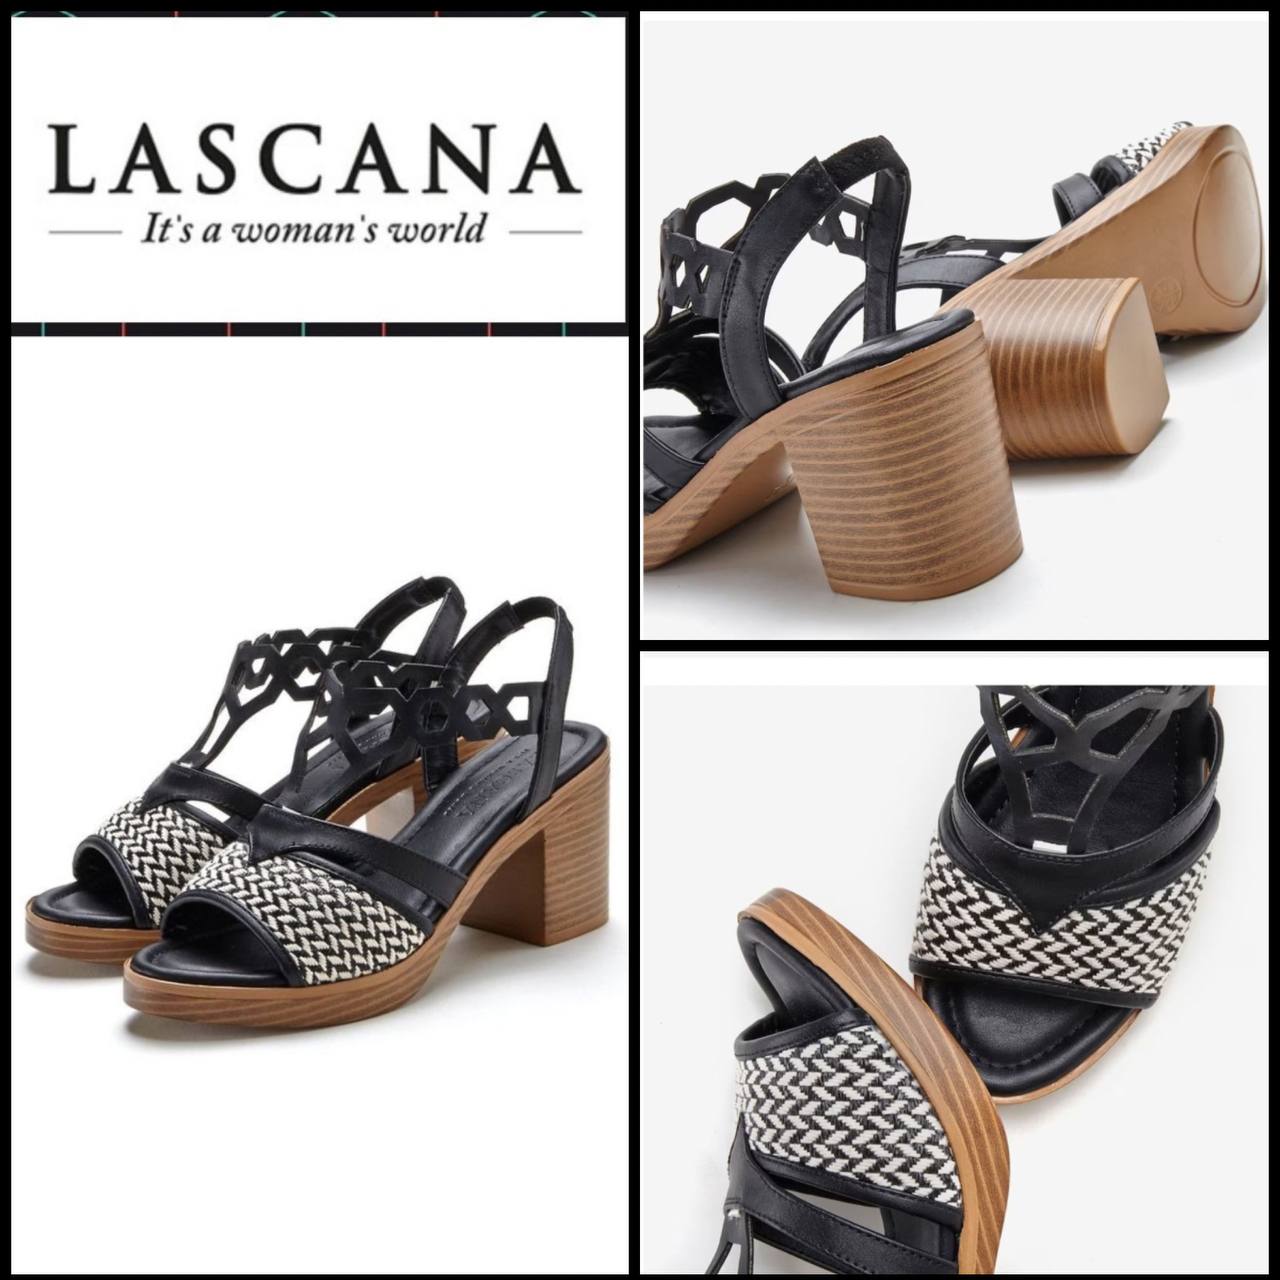 Women's sandals from Lascana